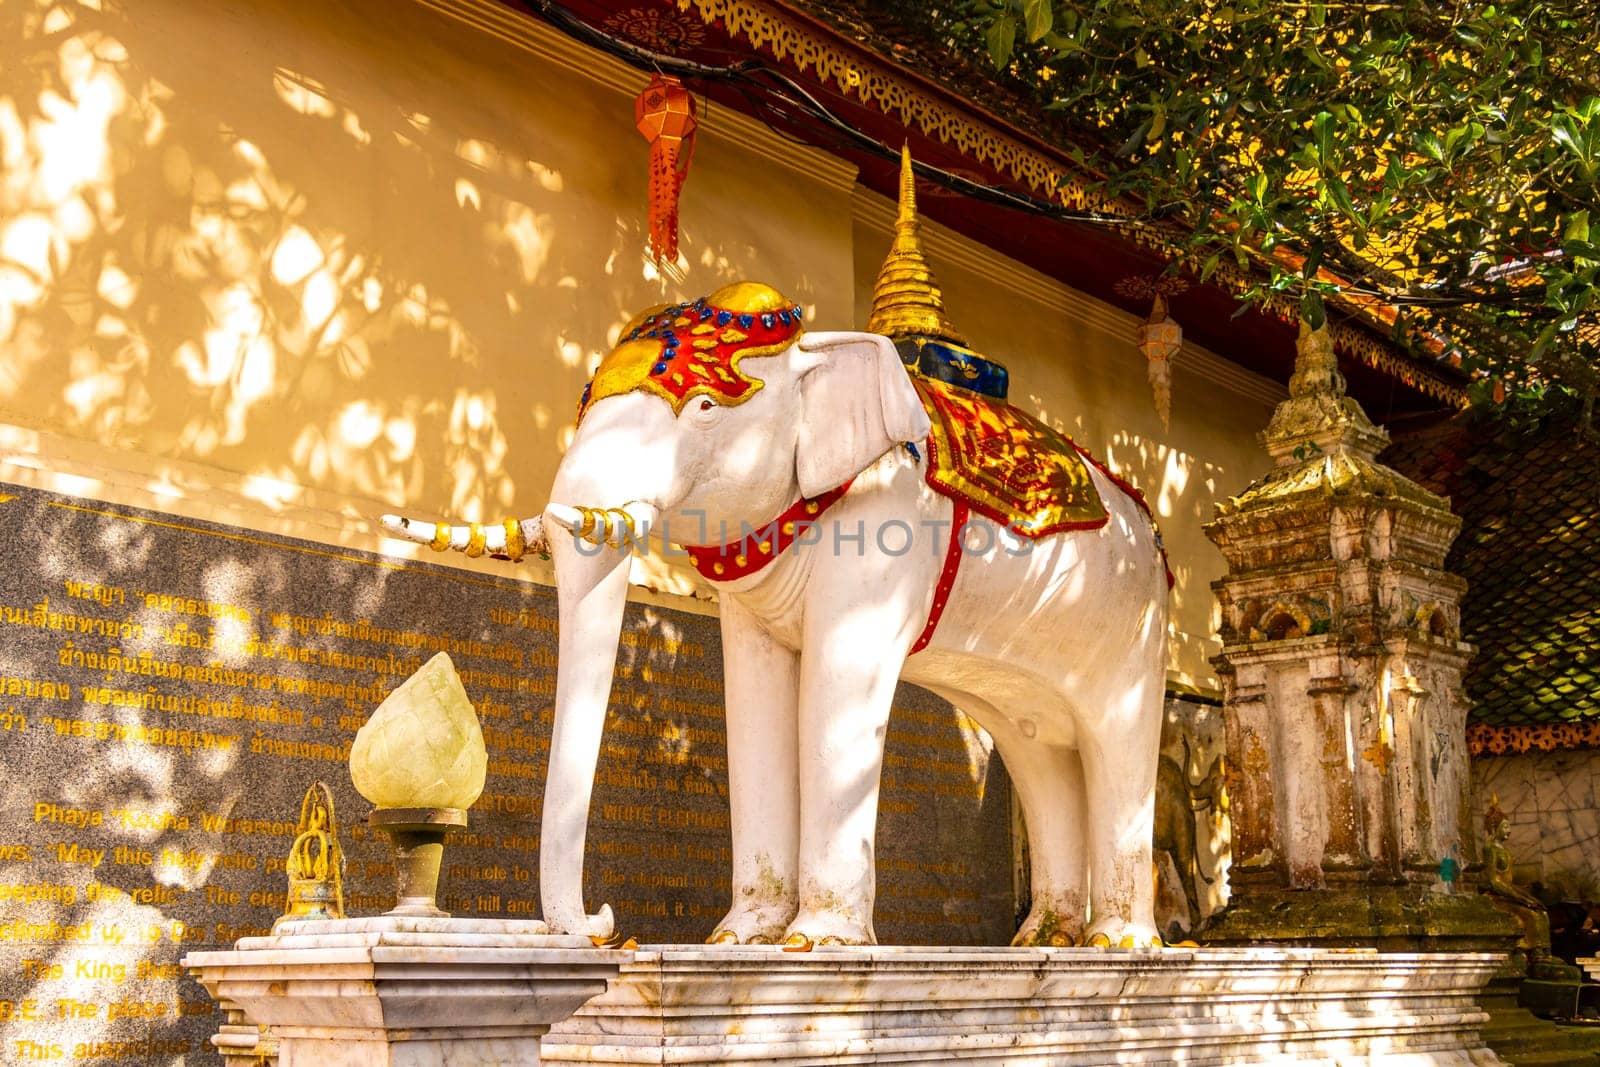 Elephant sculpture at golden gold Wat Phra That Doi Suthep temple temples building in Chiang Mai Amphoe Mueang Chiang Mai Thailand in Southeastasia Asia.